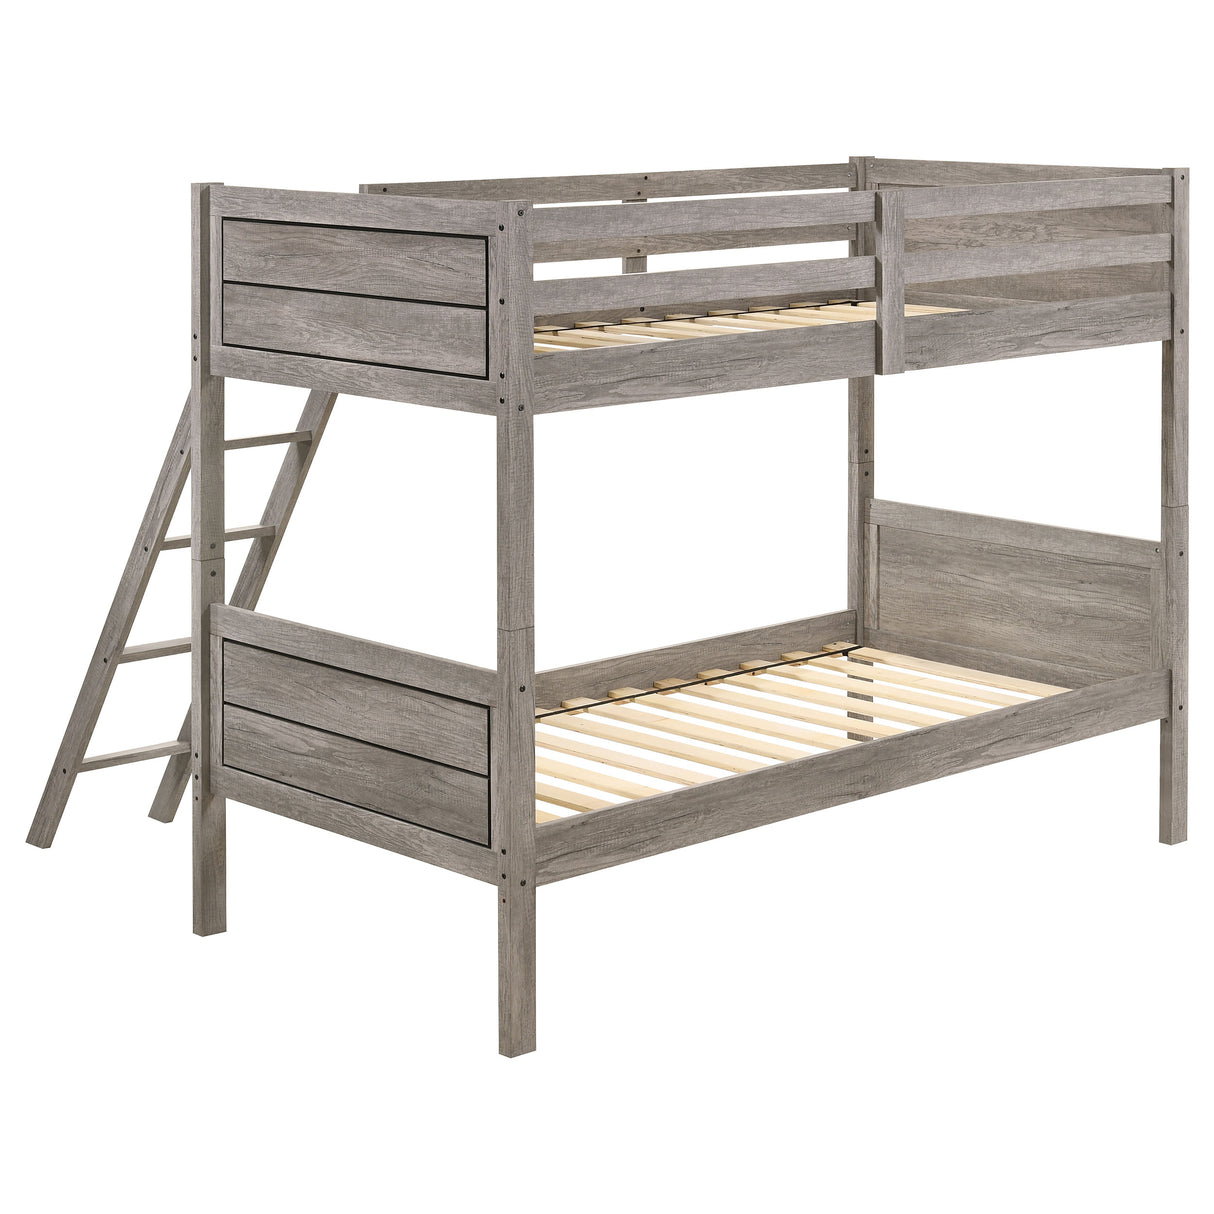 Twin / Twin Bunk Bed - Ryder Twin Over Twin Bunk Bed Weathered Taupe